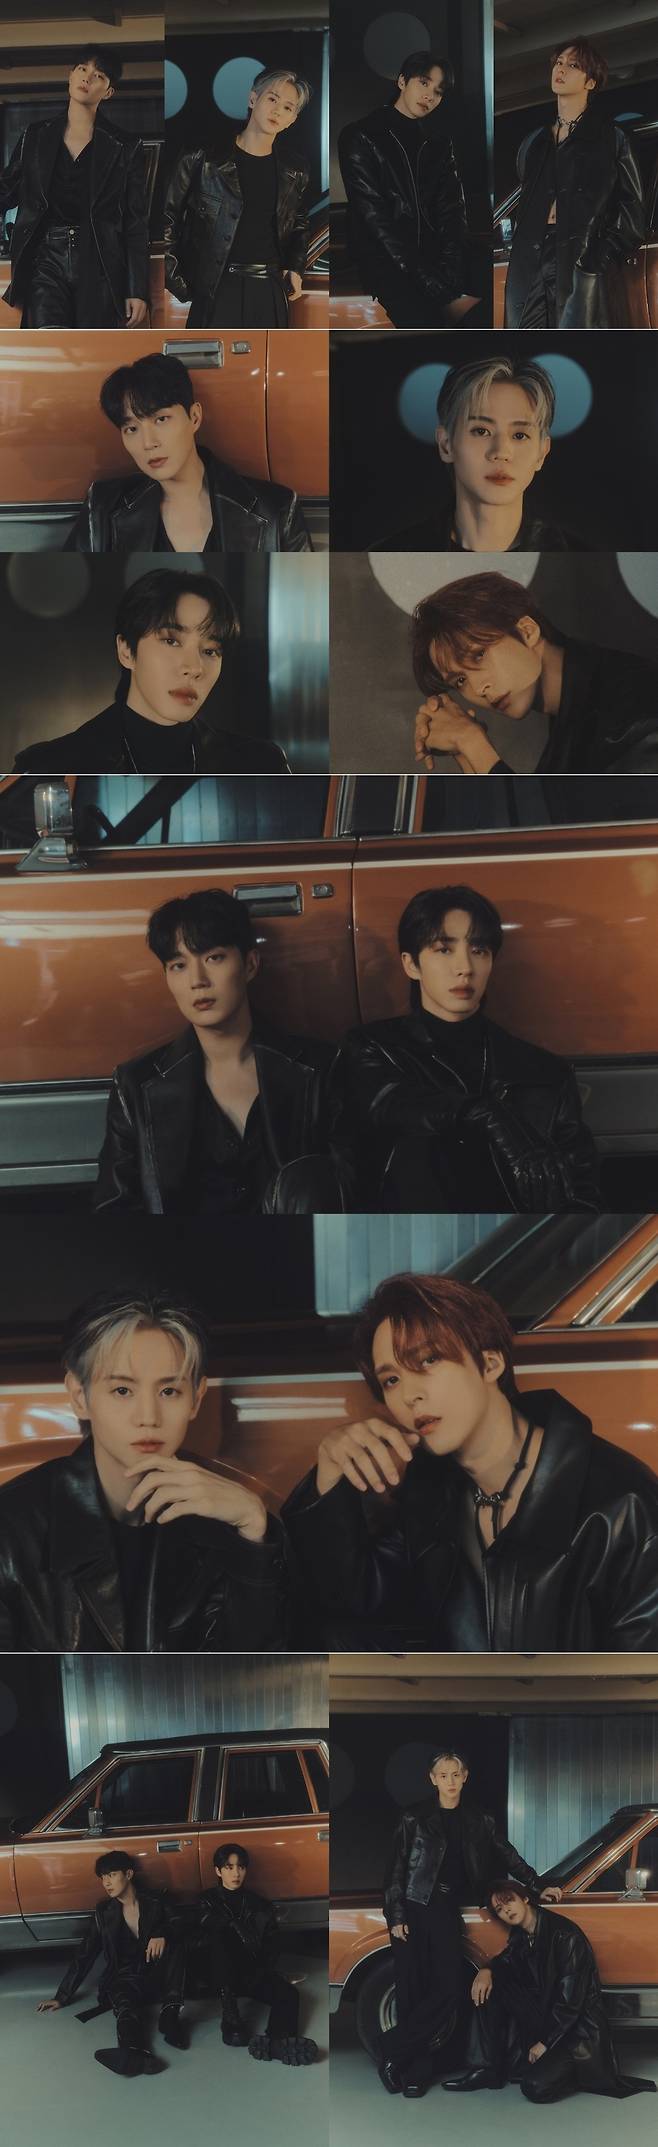 The group Highlight (Yoon Doo-joon, Yang Yo-seob, Lee Gi-kwang and Son Dong-woon) presented a four-person, four-color attraction.Highlight released its 4th mini album  ⁇  AFTER SUNSET  ⁇  (After Sunset) first  ⁇  NIGHT  ⁇  (Night) version concept photo through official SNS on October 27th and 28th.On the 27th, four members personal cuts came up.Yoon Doo-joon gave an overwhelming immersion feeling, and Yang Yo-seob of bright hair emanated dreamy charm.Lee Gi-kwang added a sense of depth to the photographs with his eyes, and Son Dong-woon in a long coat created a mysterious mood. All-black leather styling and an orange old car background emphasized Highlights aura.On the 28th, group cuts and unit cuts were unveiled.Highlight showed a reversal charm where warmth and dark mood coexisted, especially in unit cuts, Yoon Doo-joon and Lee Gi-kwang, Yang Yo-seob and Son Dong-woons all-round chemistry shone. ⁇  AFTER SUNSET  ⁇  is a complete album released by Highlight in eight months. Trailer video is followed by a new visual of the members with concept photo, and it is getting hot reaction every day.Highlight will continue to release another version of its concept photo and teasing content.AFTER SUNSET will be released at 6 pm on November 7.